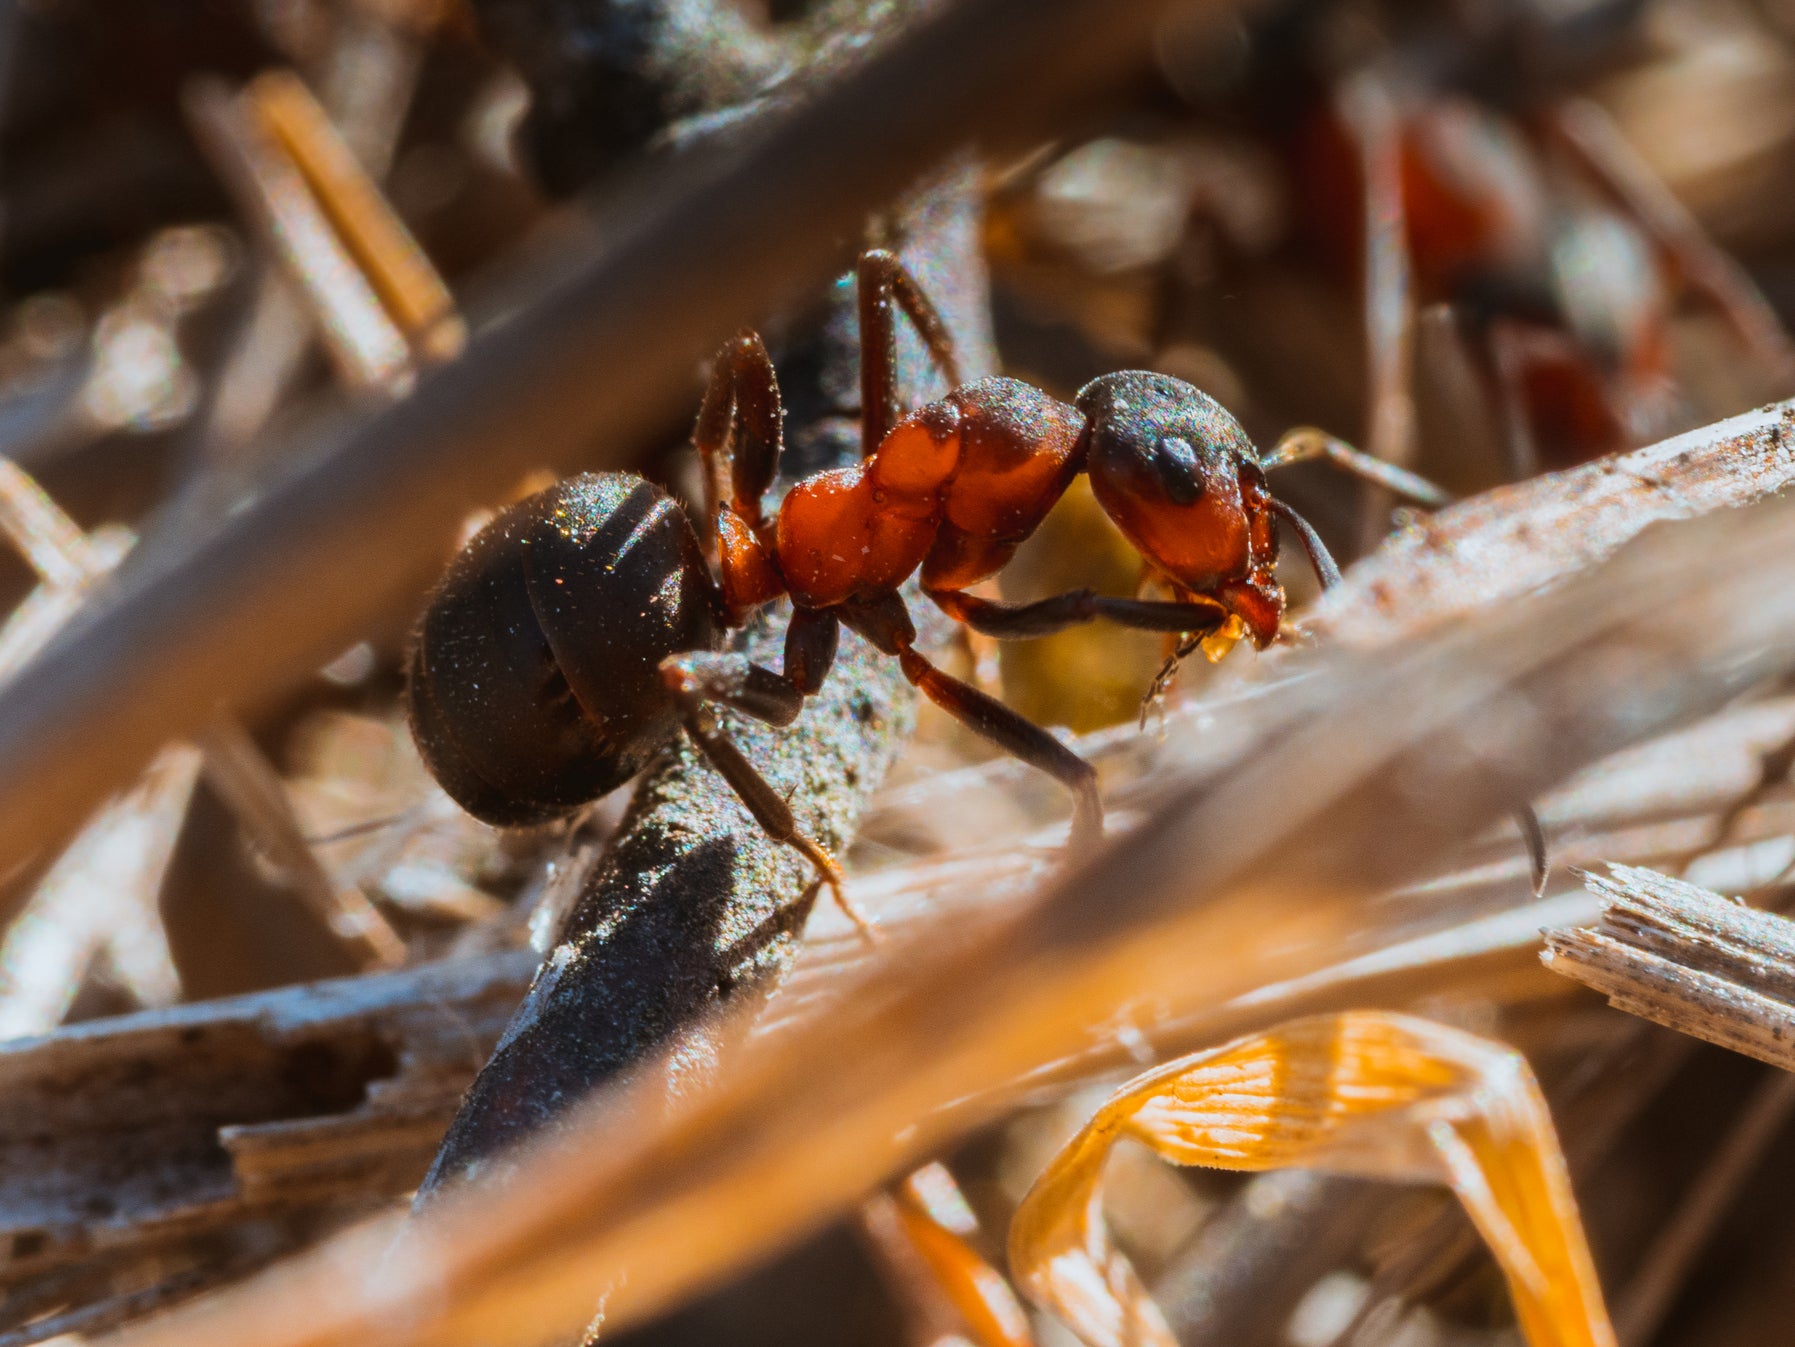 Researchers examined sales of invasive ants to analyse how the market for pets favoured trade of invasive species